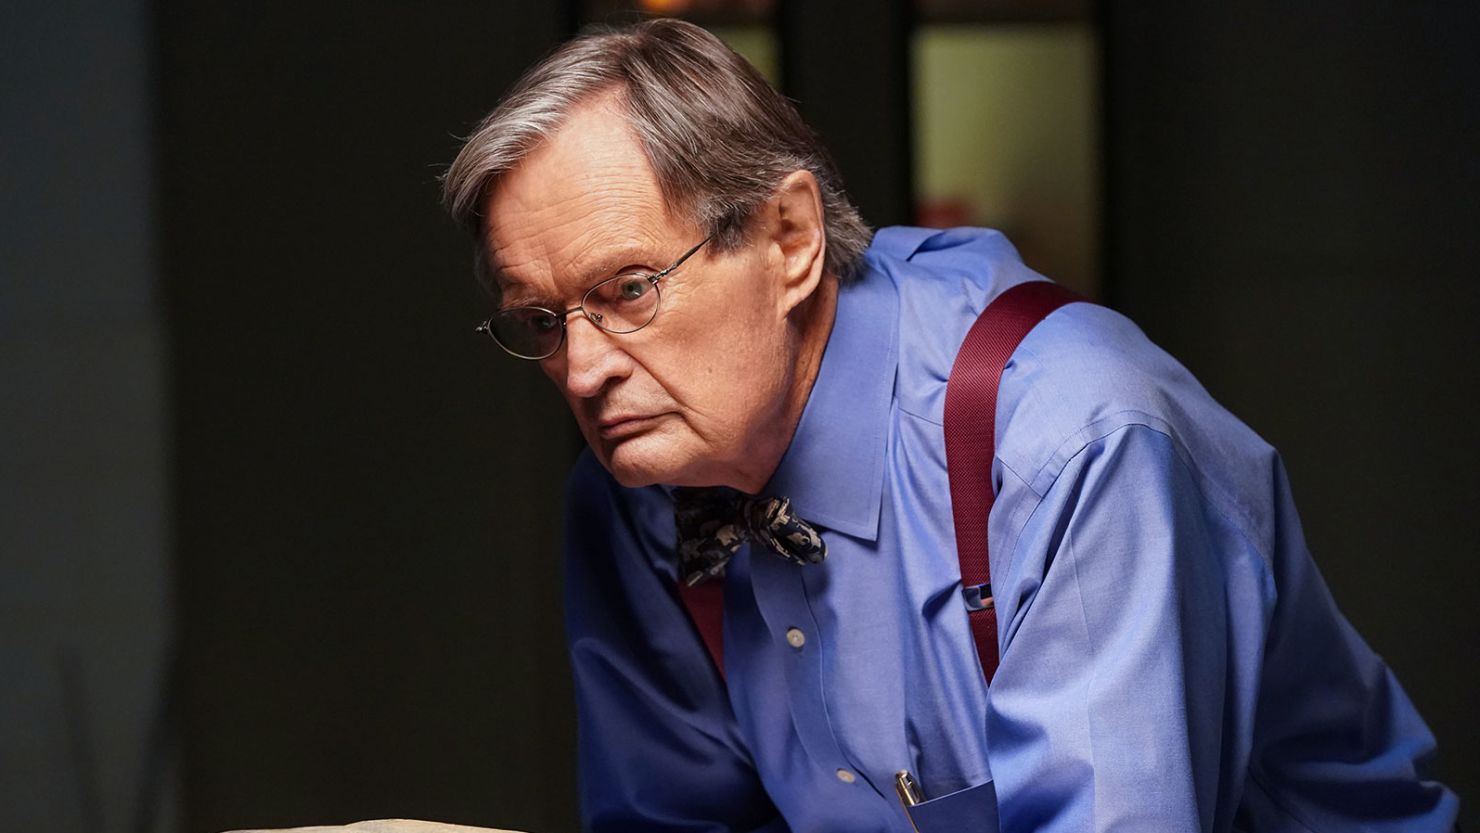 David McCallum, seen here in his role as Donald "Ducky" Mallard on 'NCIS,' died Monday, according to a statement from his family. 